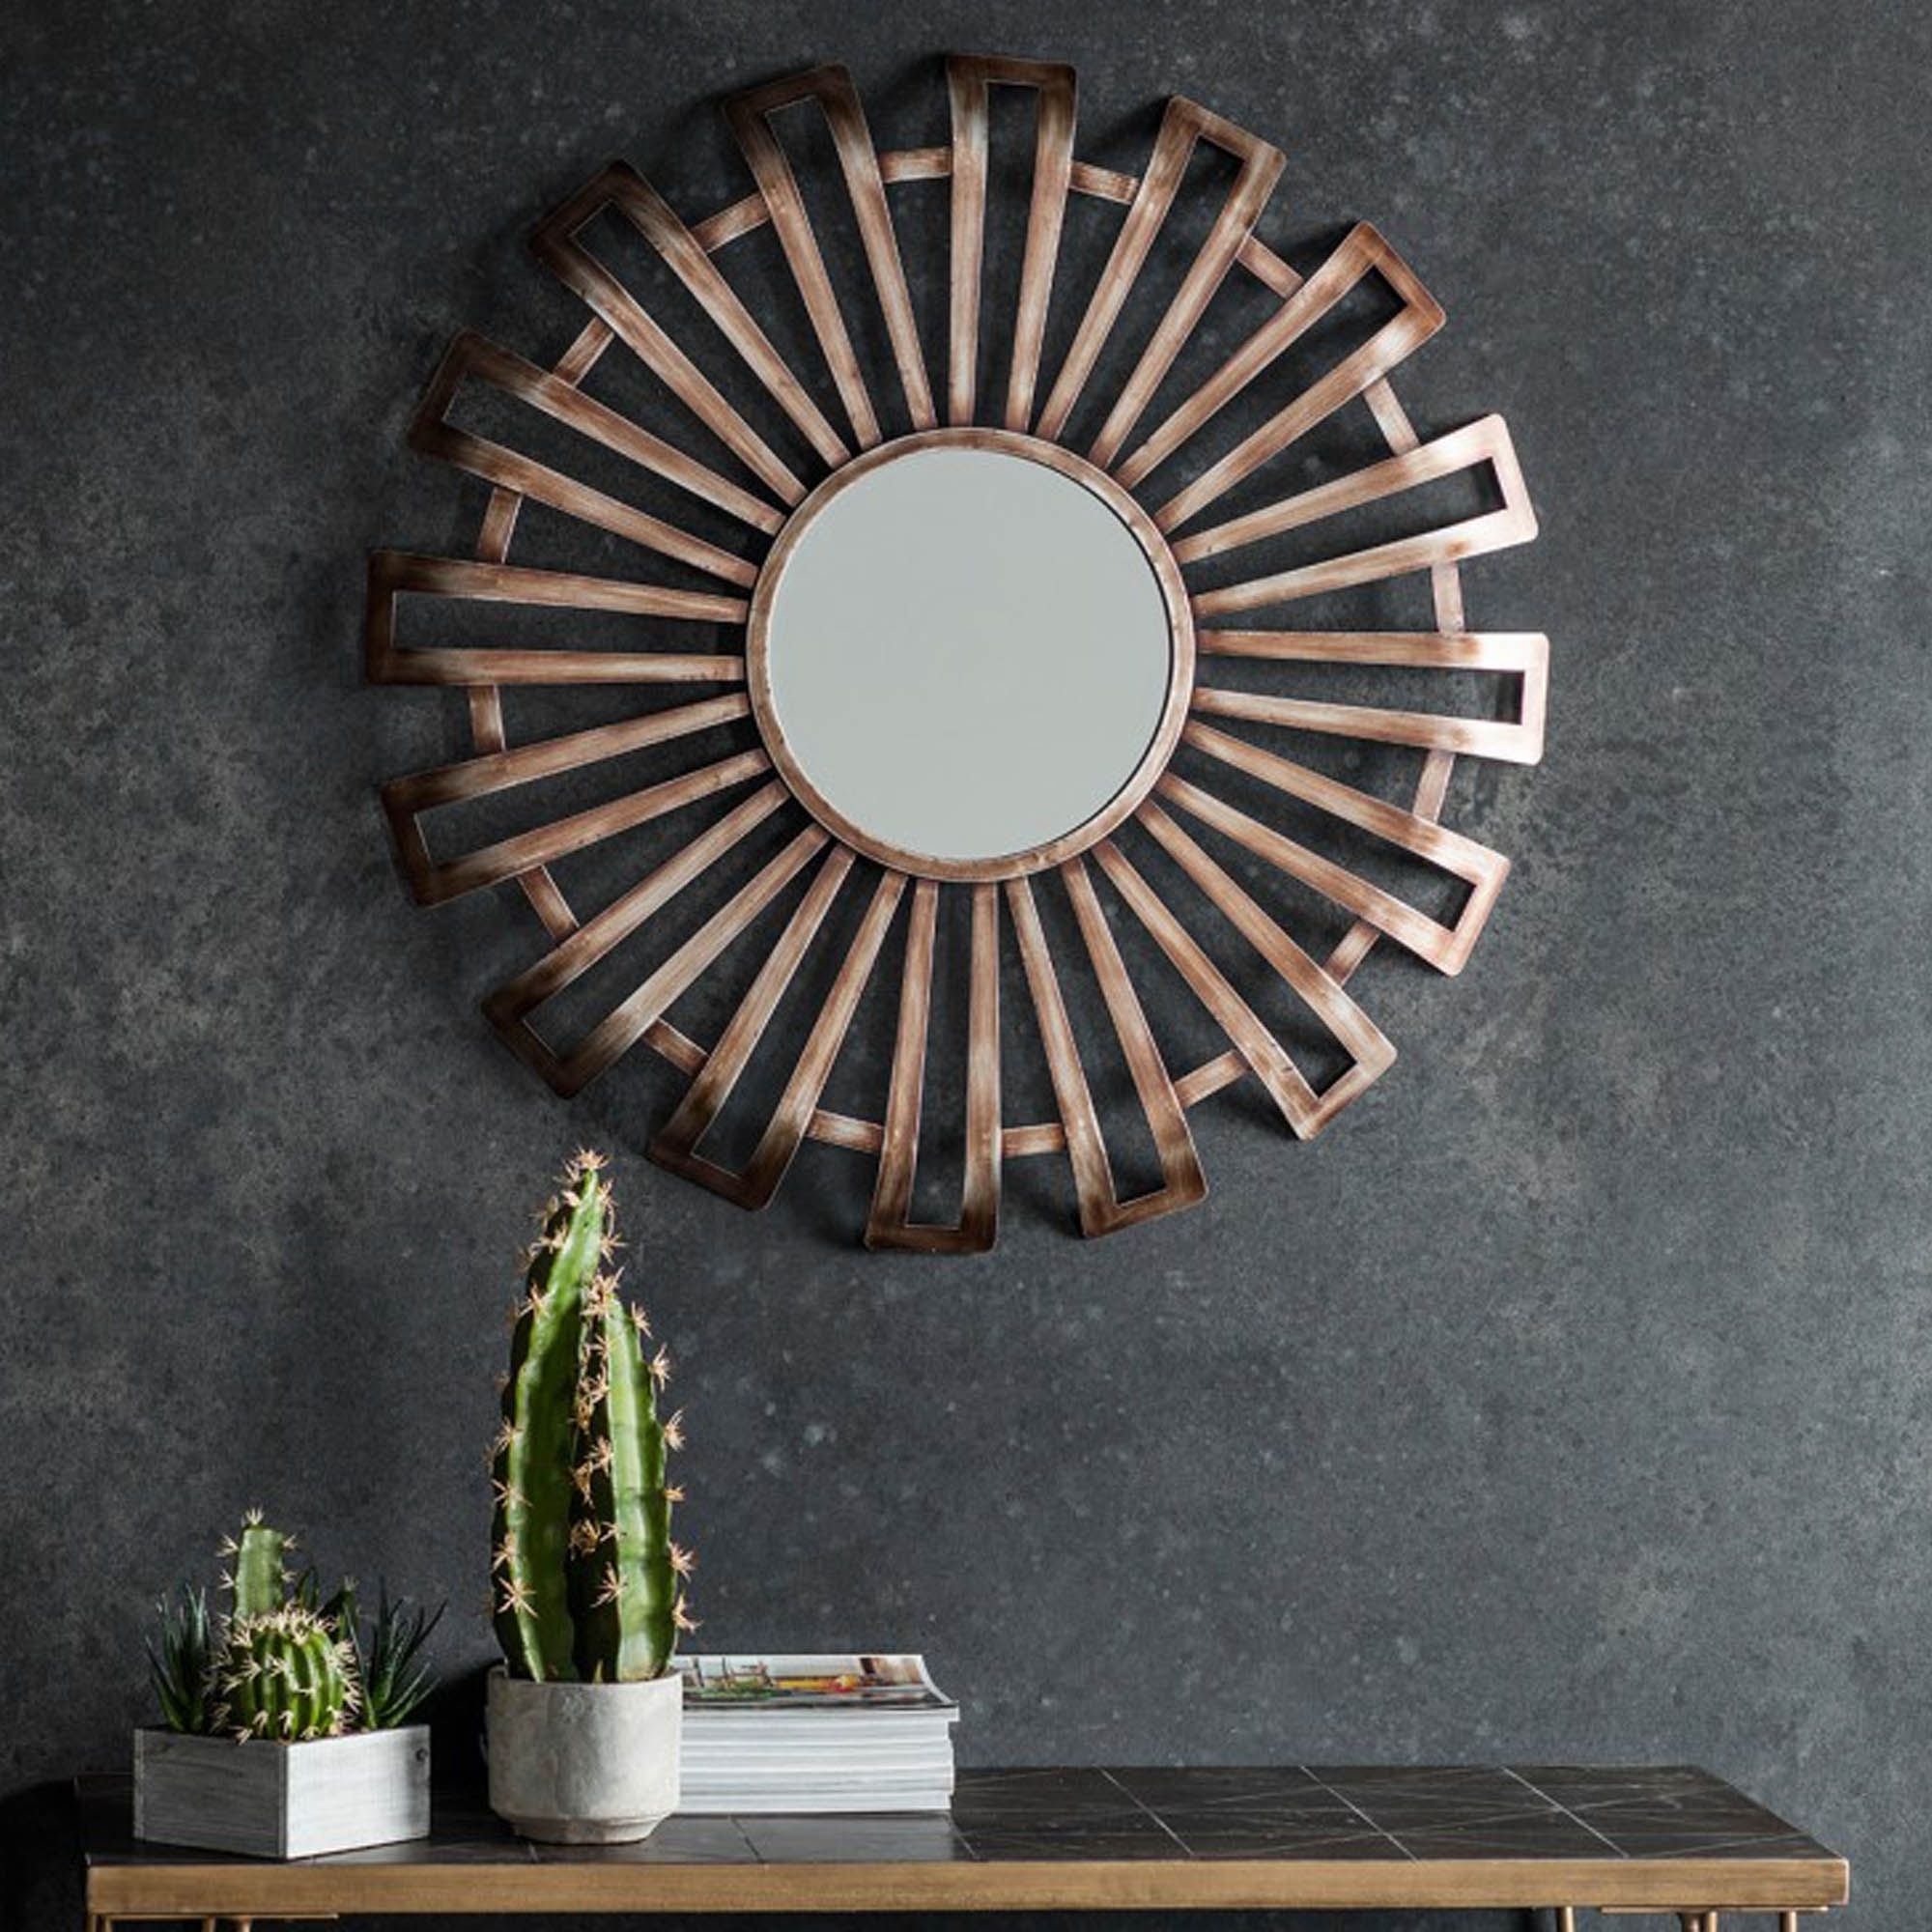 Latest Circular Wall Mirrors Pertaining To Nixon Round Wall Mirror (View 9 of 20)